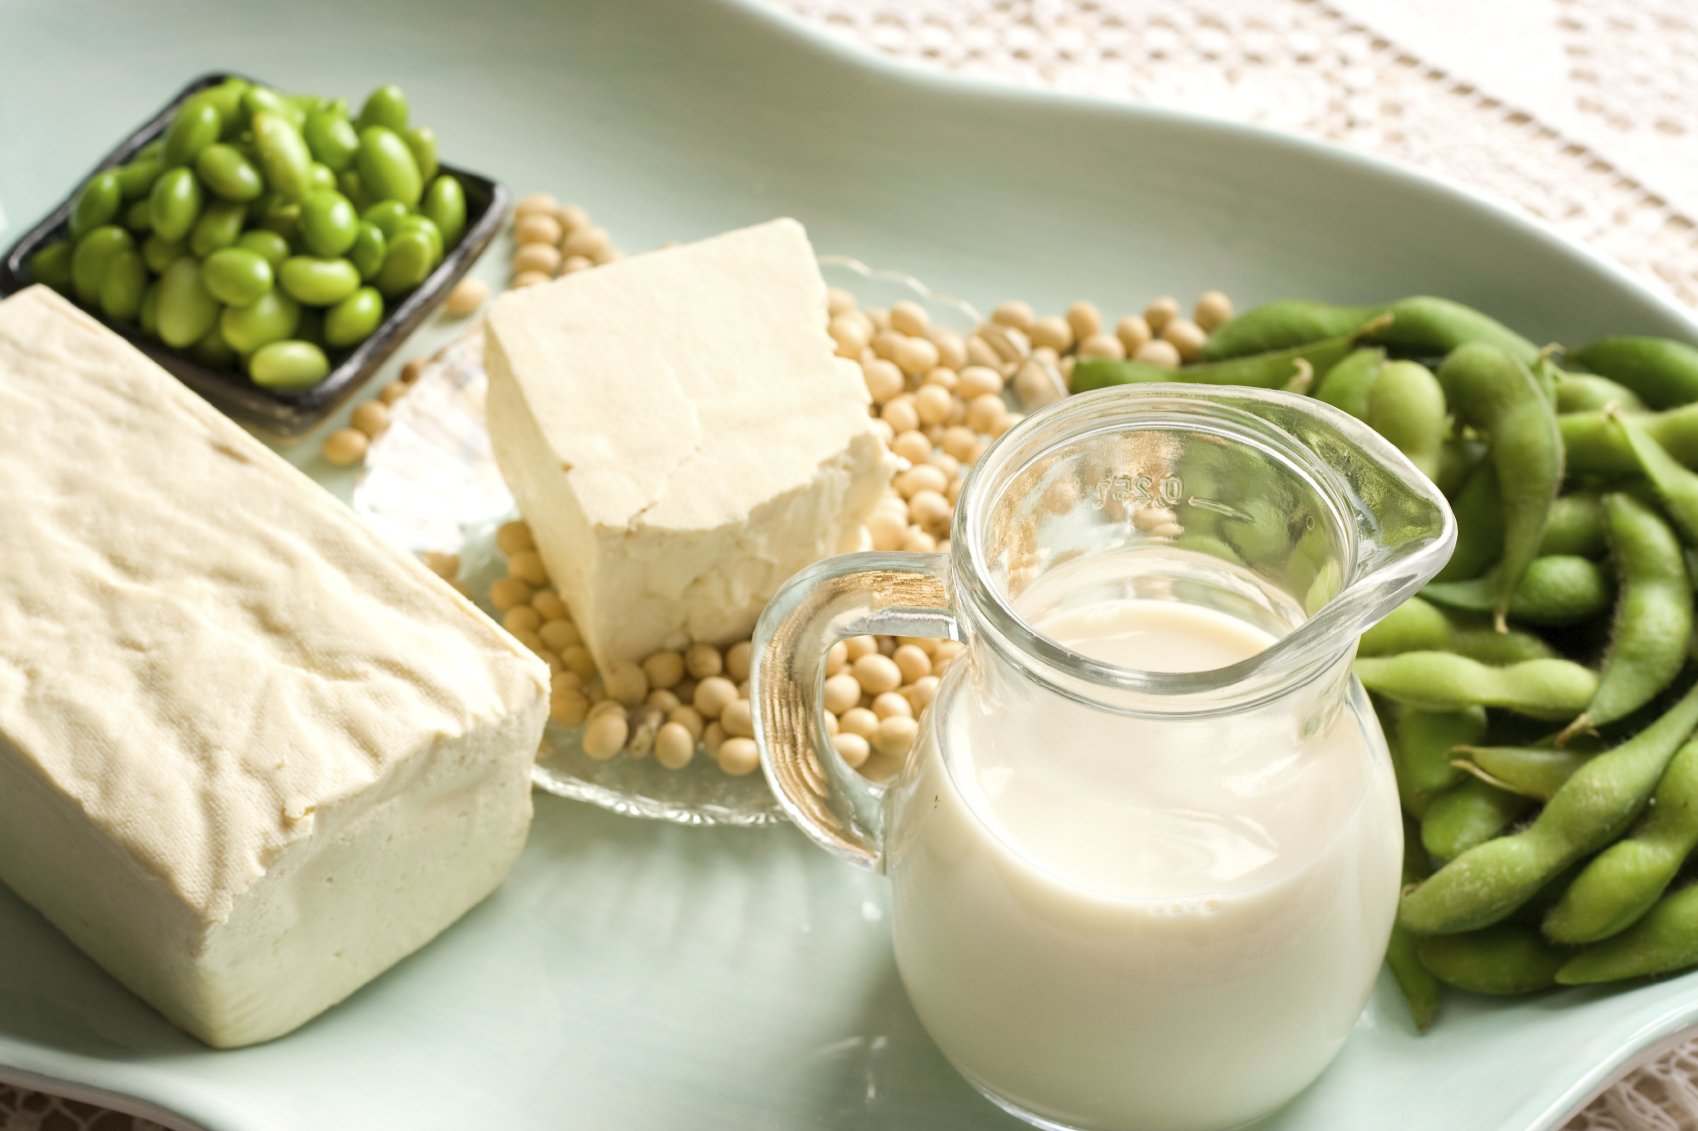 Soy Products with soybean pods, tofu, milk on serving dish